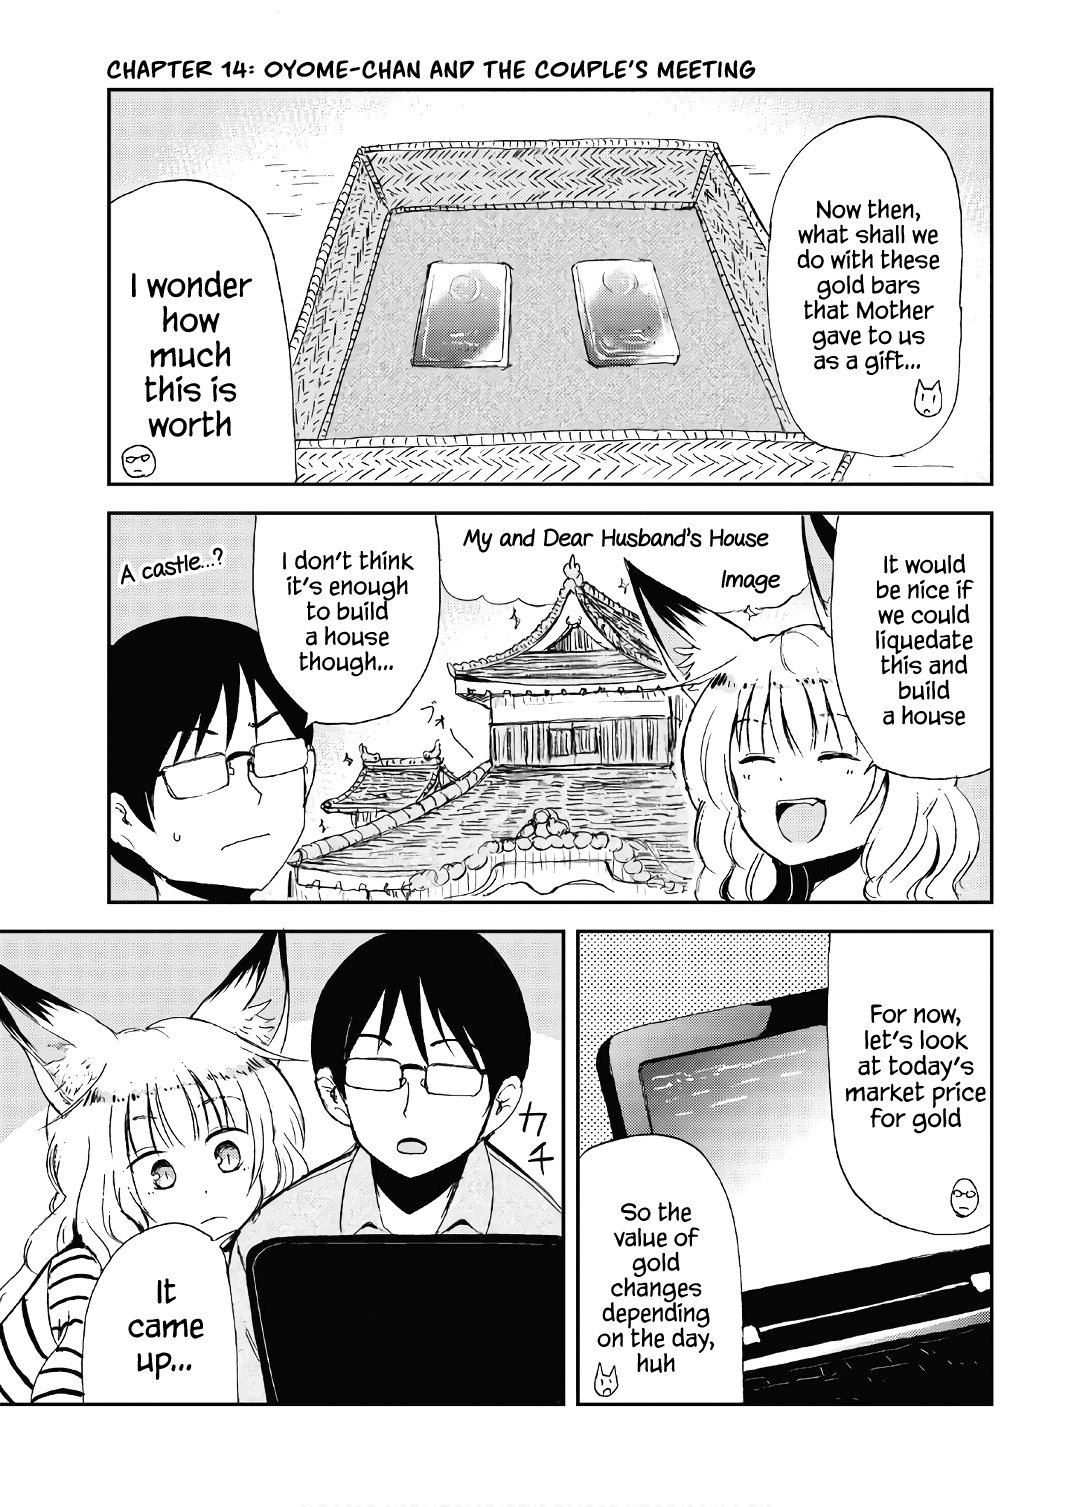 Kitsune No Oyome-Chan Vol.2 Chapter 14: Oyome-Chan And The Couple's Meeting - Picture 1